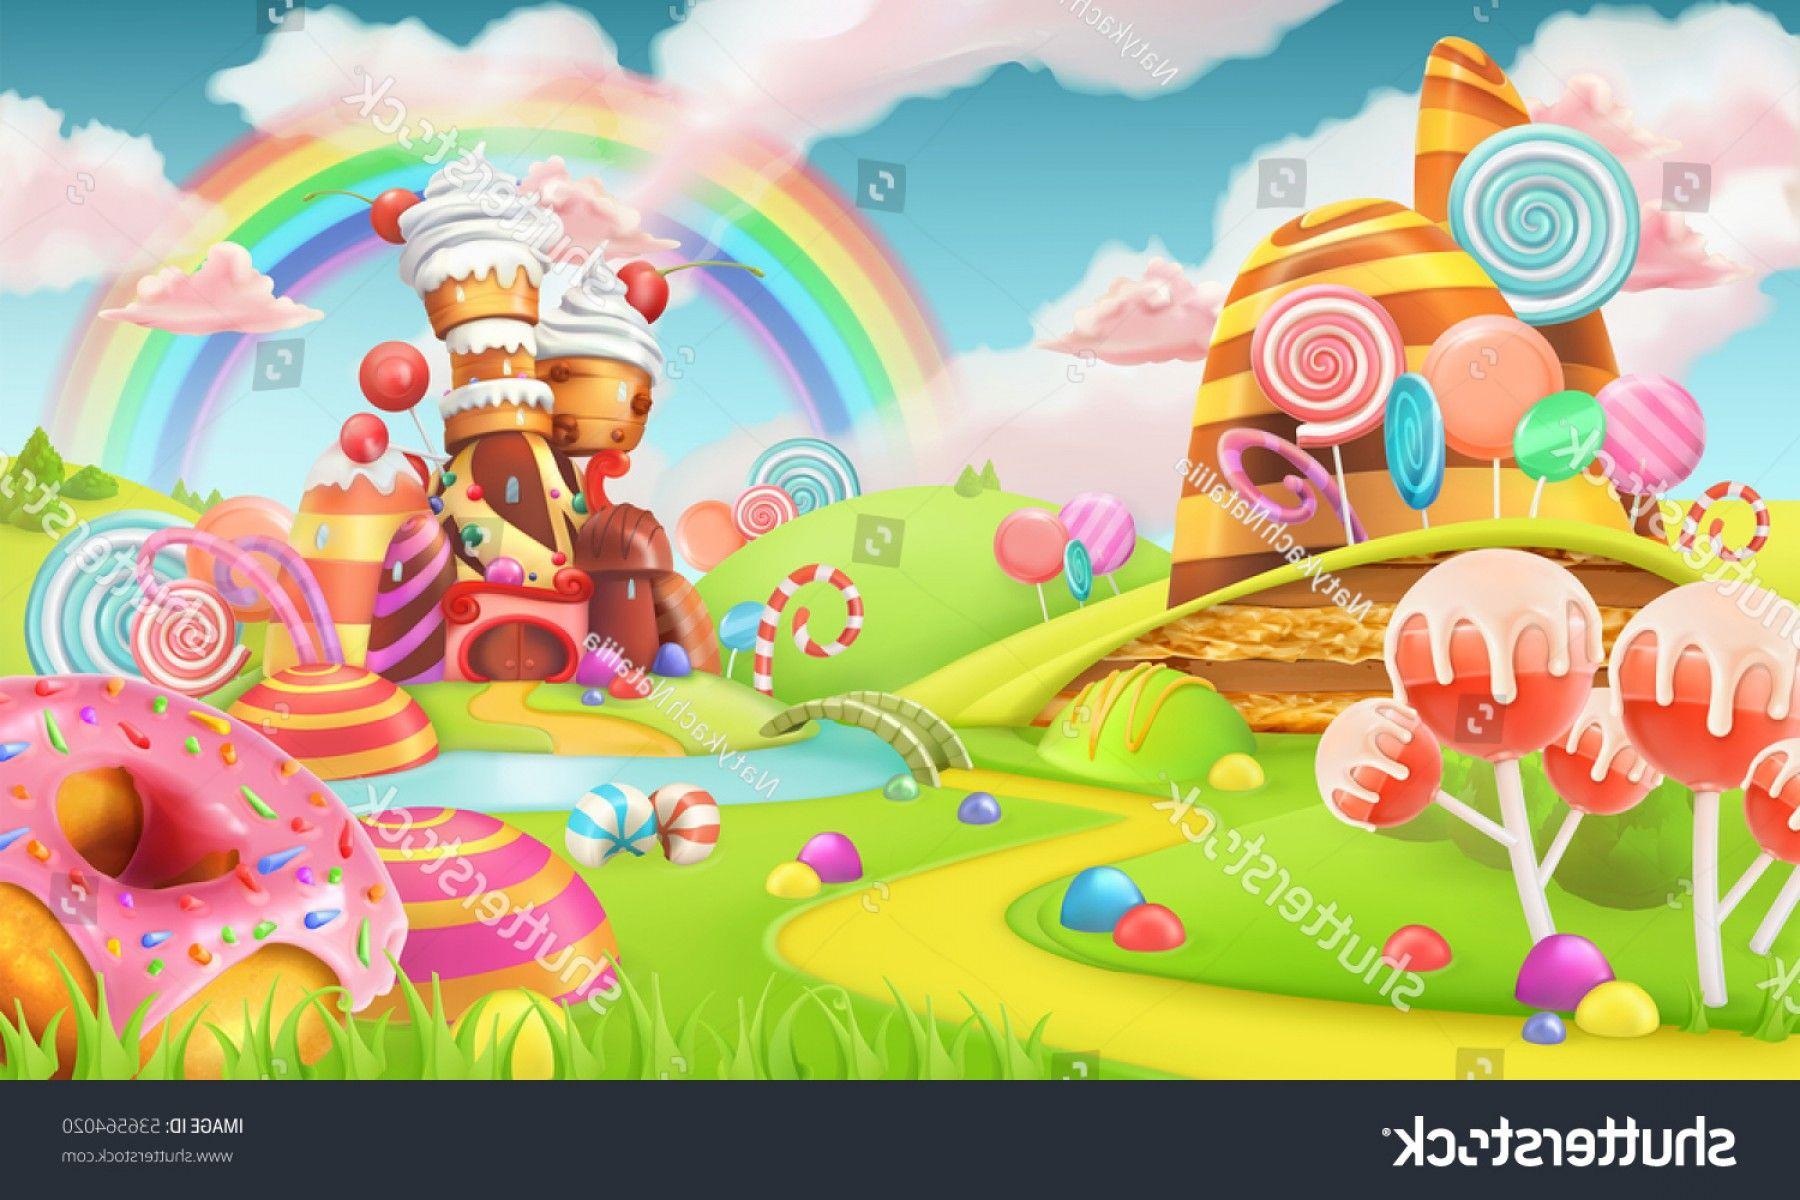 Welcome to Candy Land picture, by bjaockx for: game based photoshop contest  - Pxleyes.com